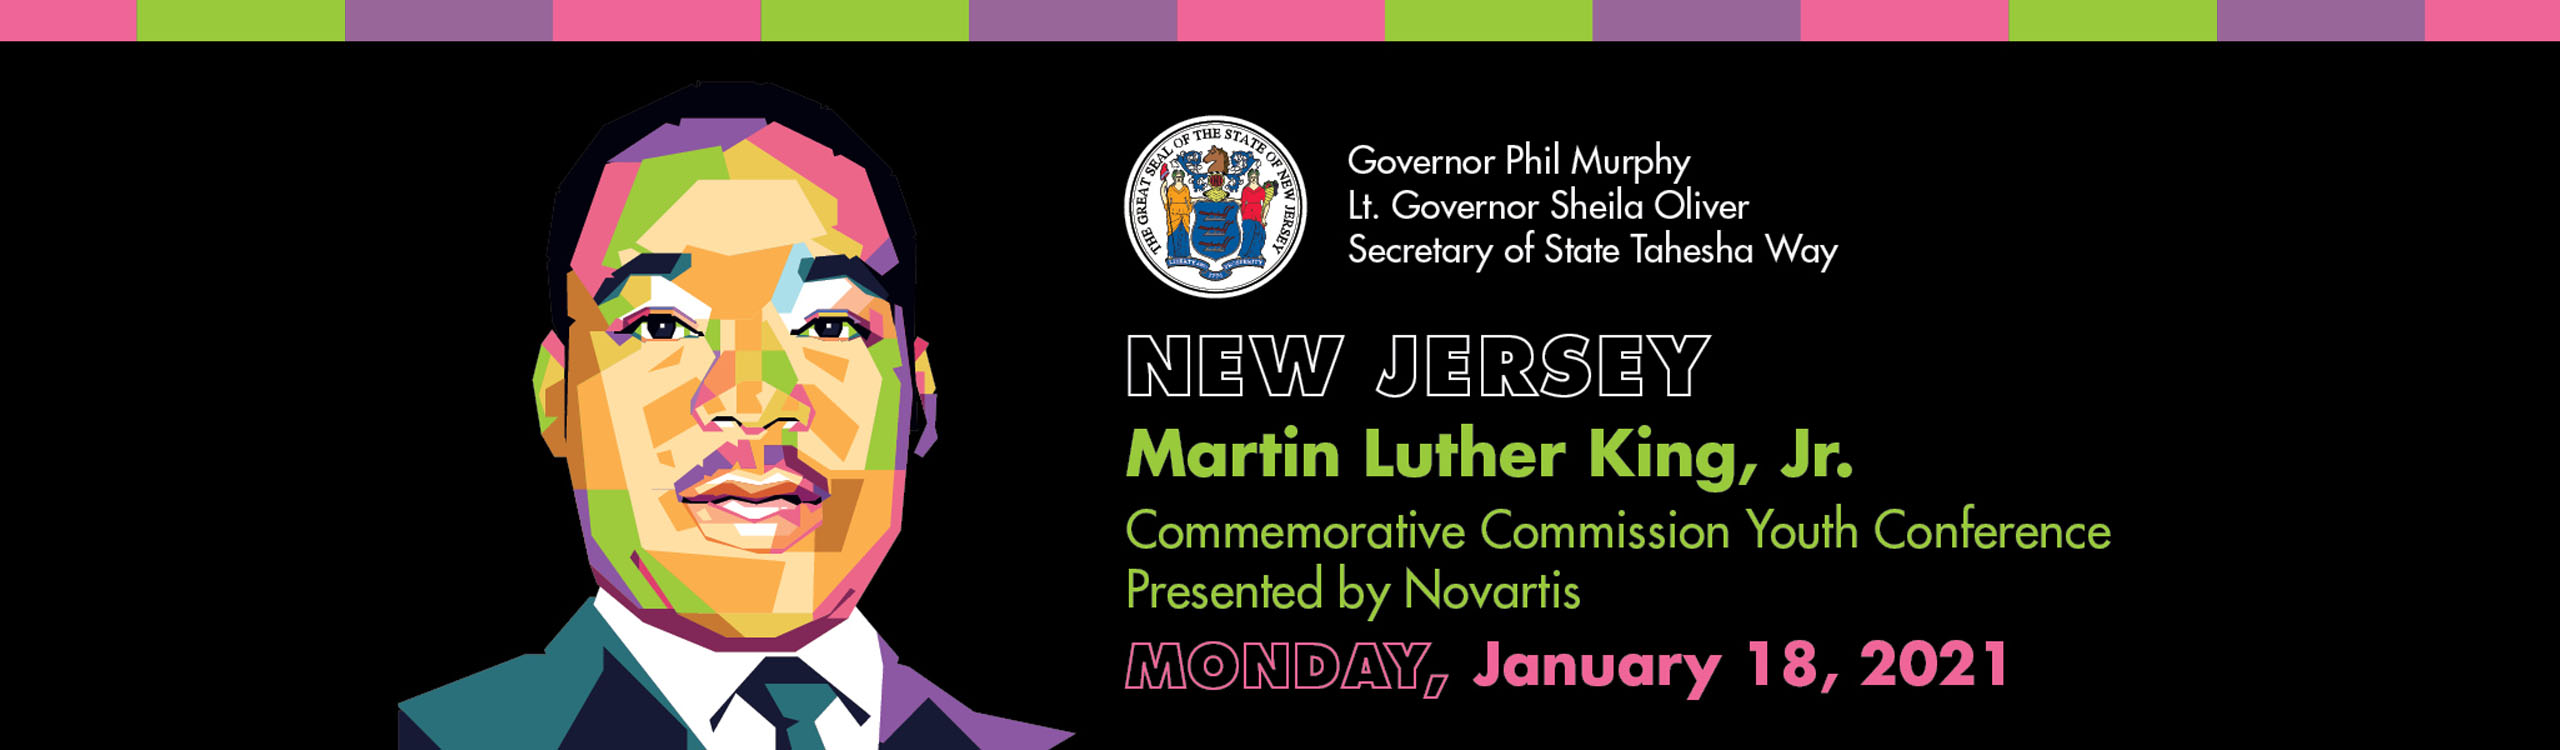 New Jersey Martin Luther King, Jr. Commemorative Commission